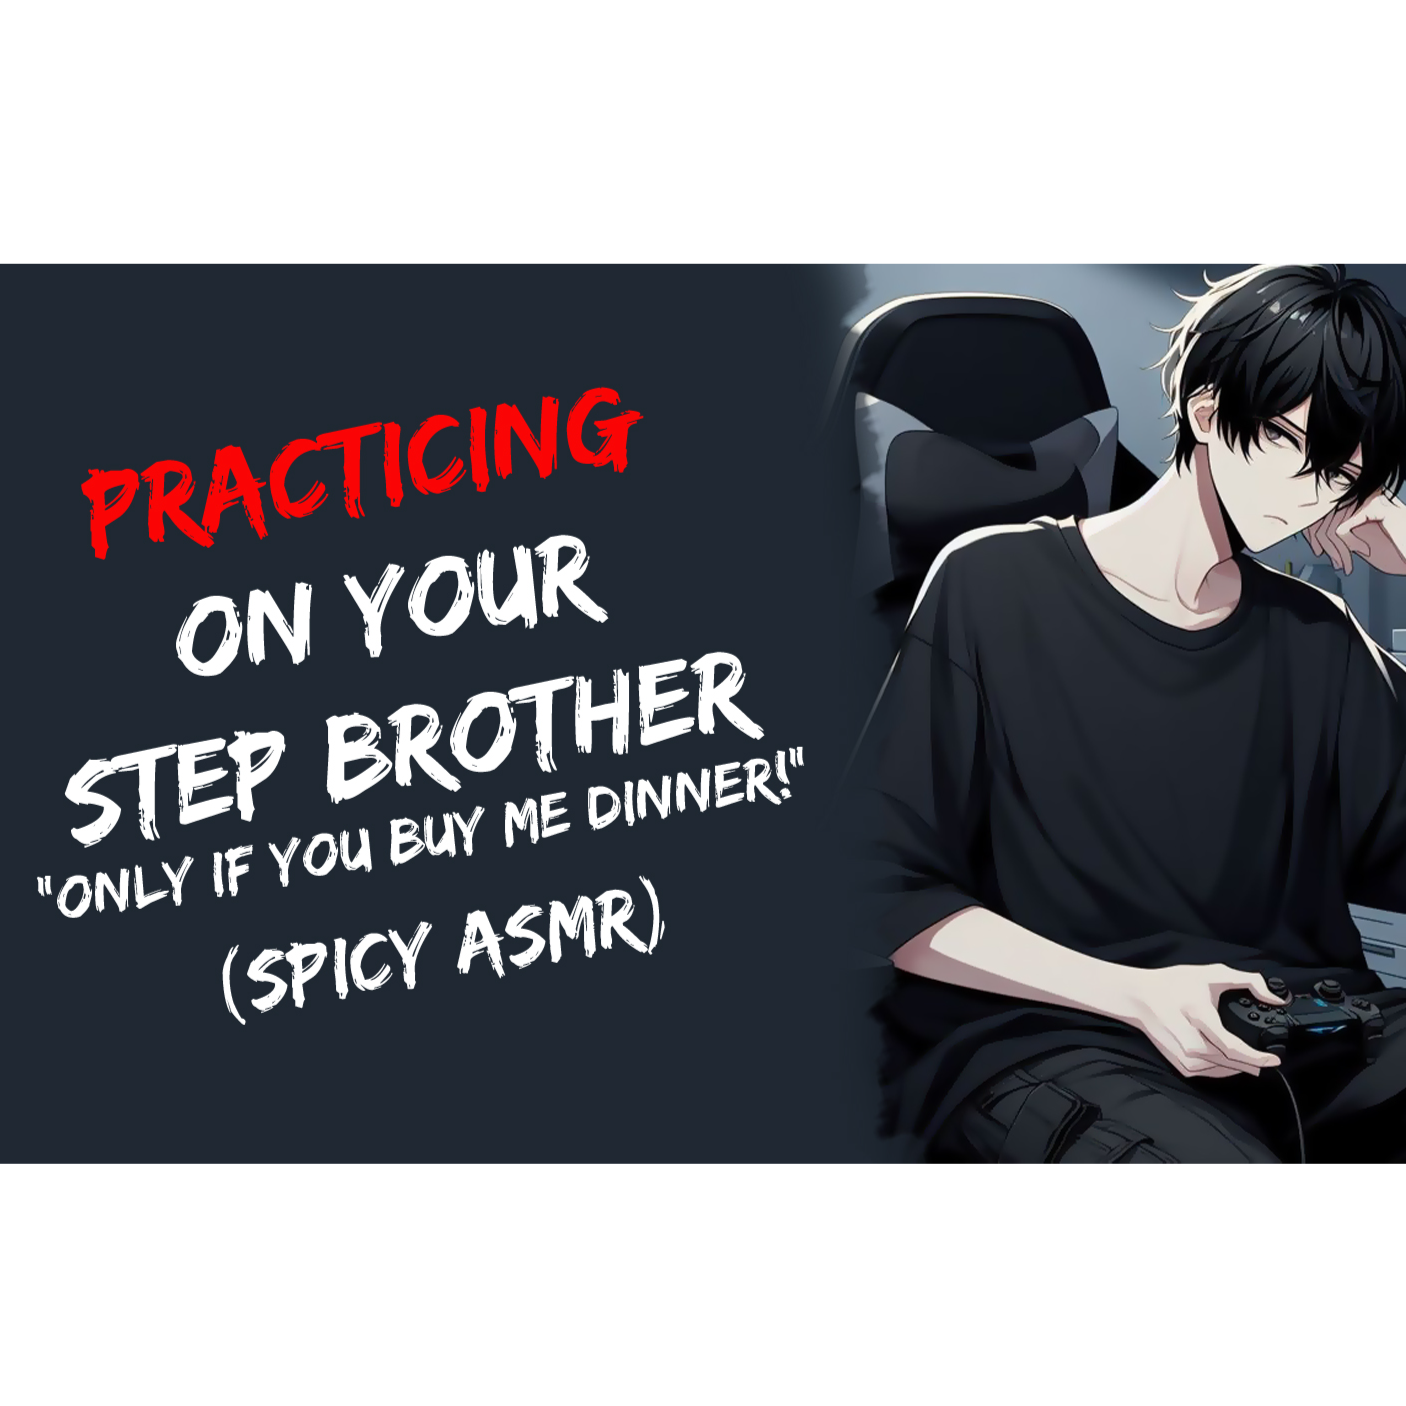 Practicing On Your Stepbrother "Only If You Buy Me Dinner!" (Spicy ASMR)